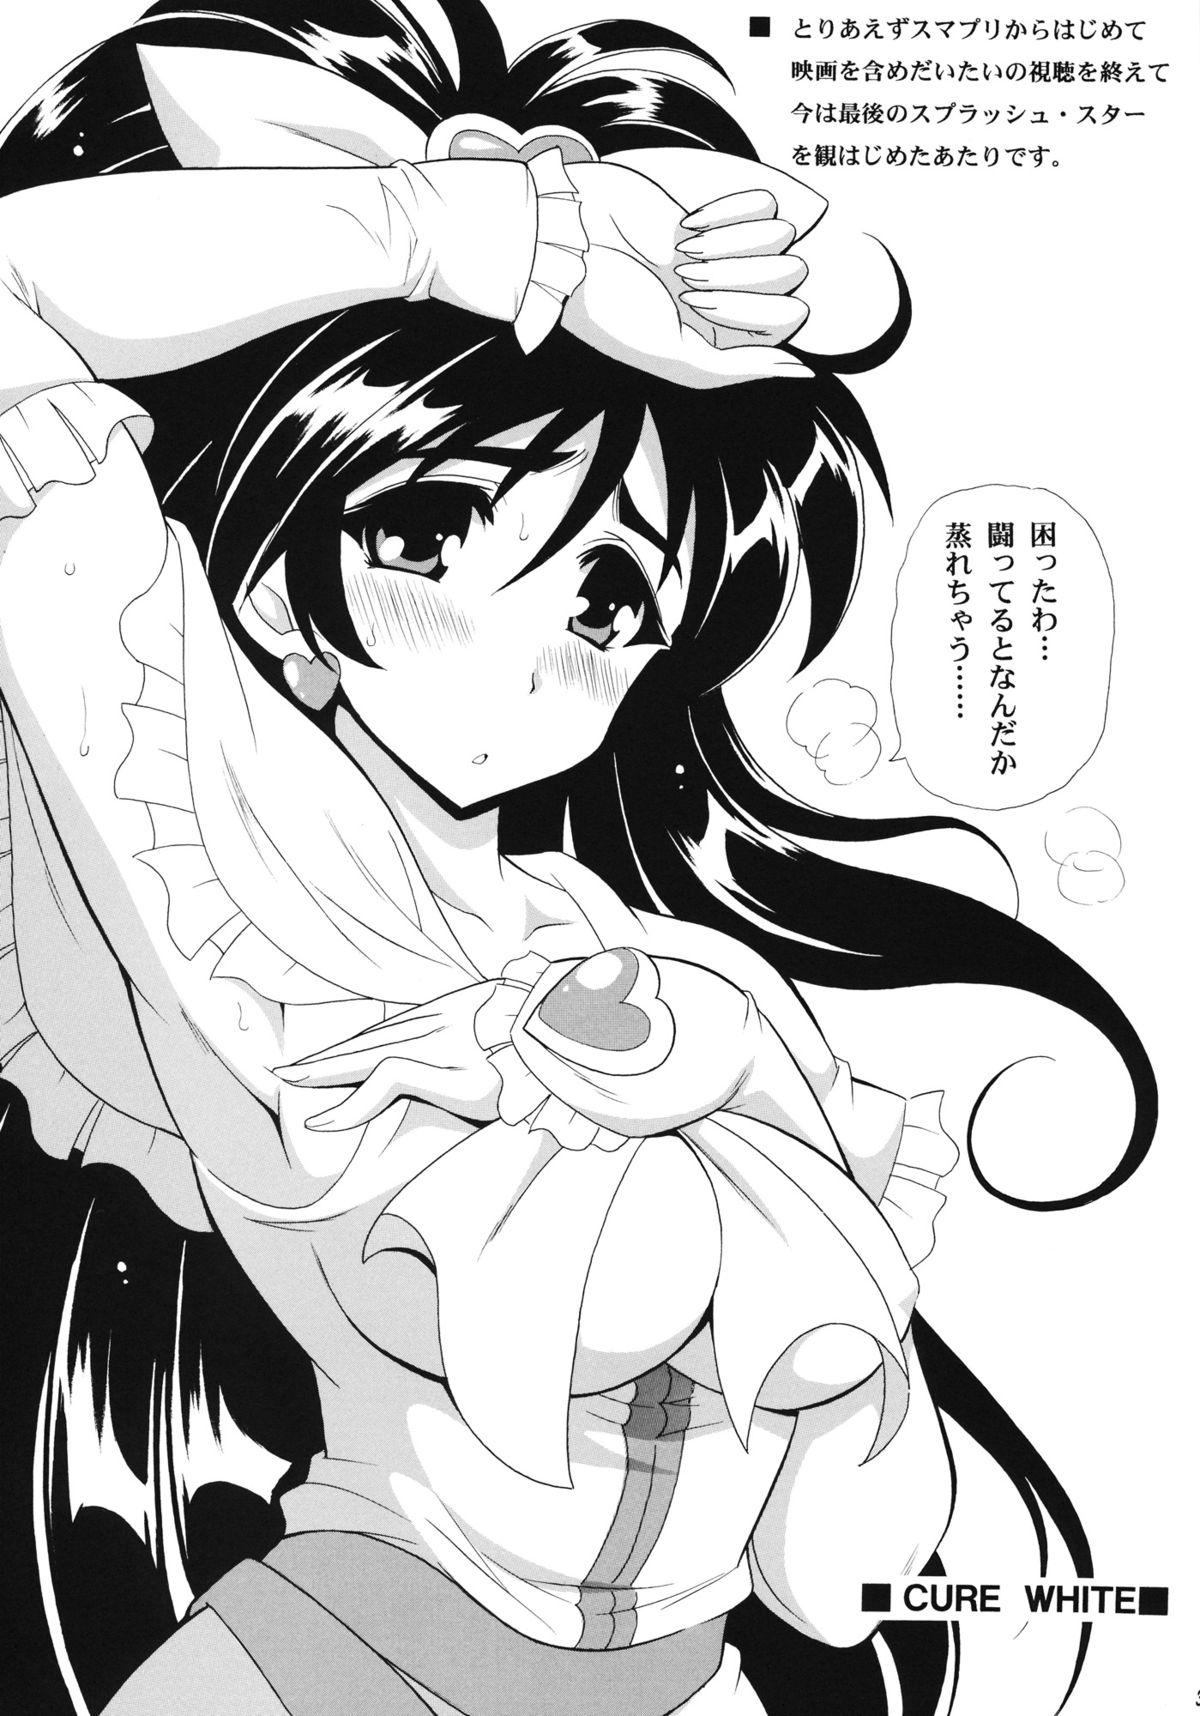 Roundass PRETTY - Pretty cure Gapes Gaping Asshole - Page 3